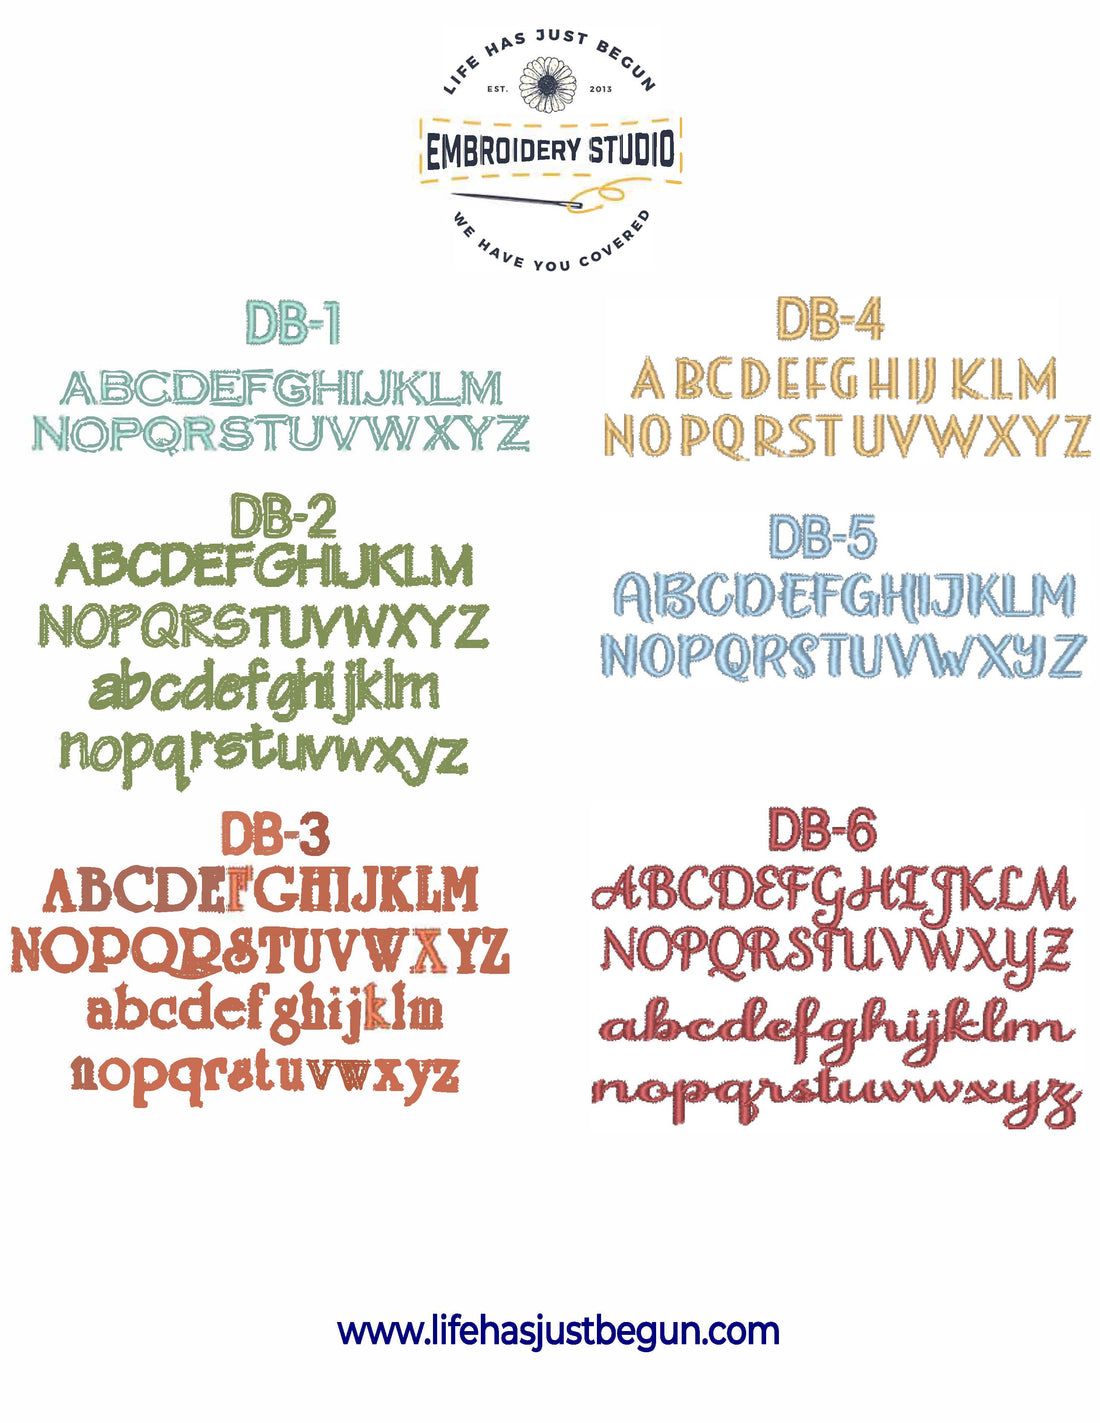 Full printout of font choices for personalized dog bandanas - Life Has Just Begun